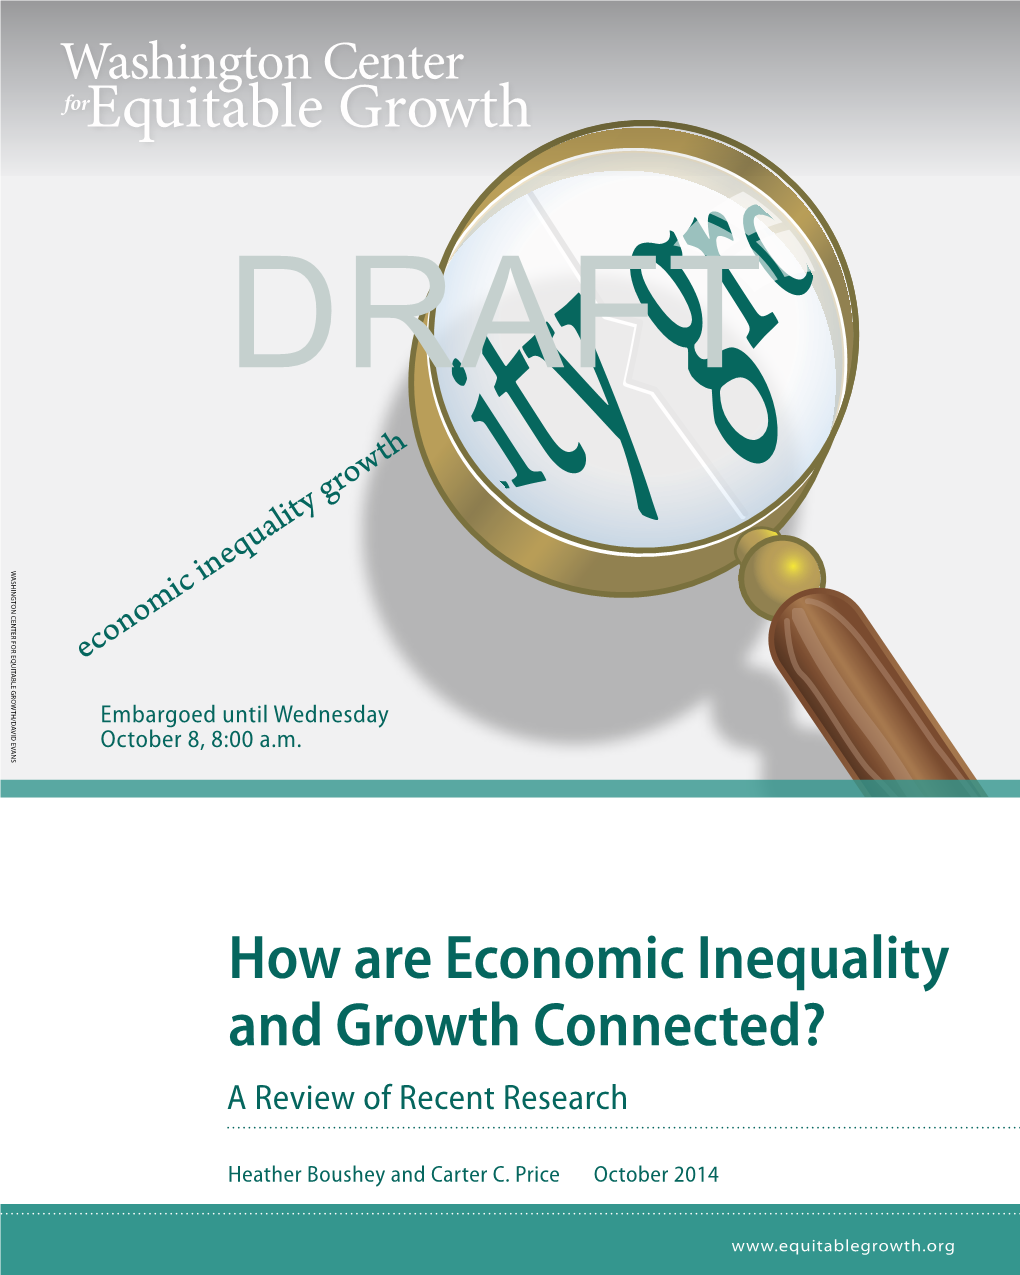 Forequitable Growth DRAFT WASHINGTON CENTER for EQUITABLE GROWTH/DAVID EVANS